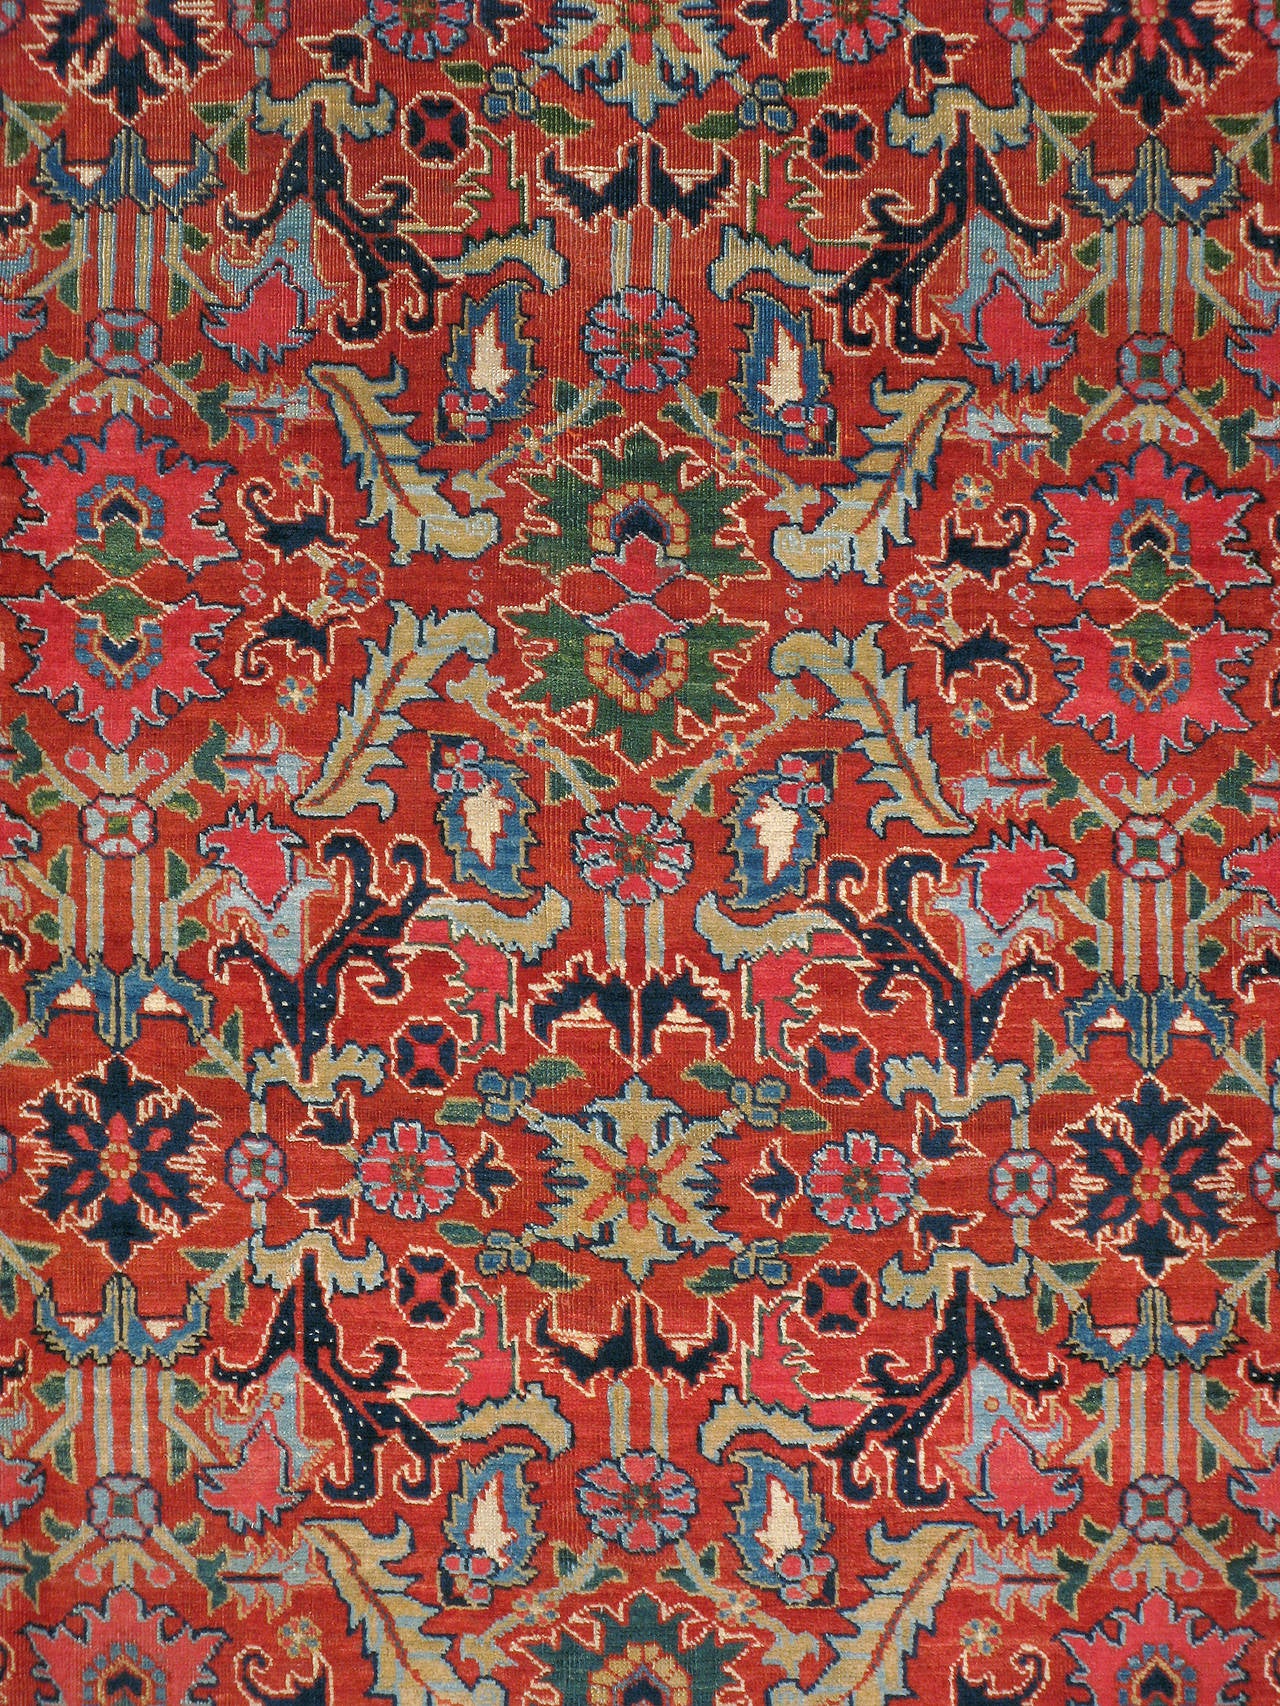 An antique Persian Heriz carpet from the first quarter of the 20th century. Heriz is the largest of the weaving towns. Most of these rugs feature a central geometric medallion surrounded by a lighter field within a geometric design scheme. Heriz